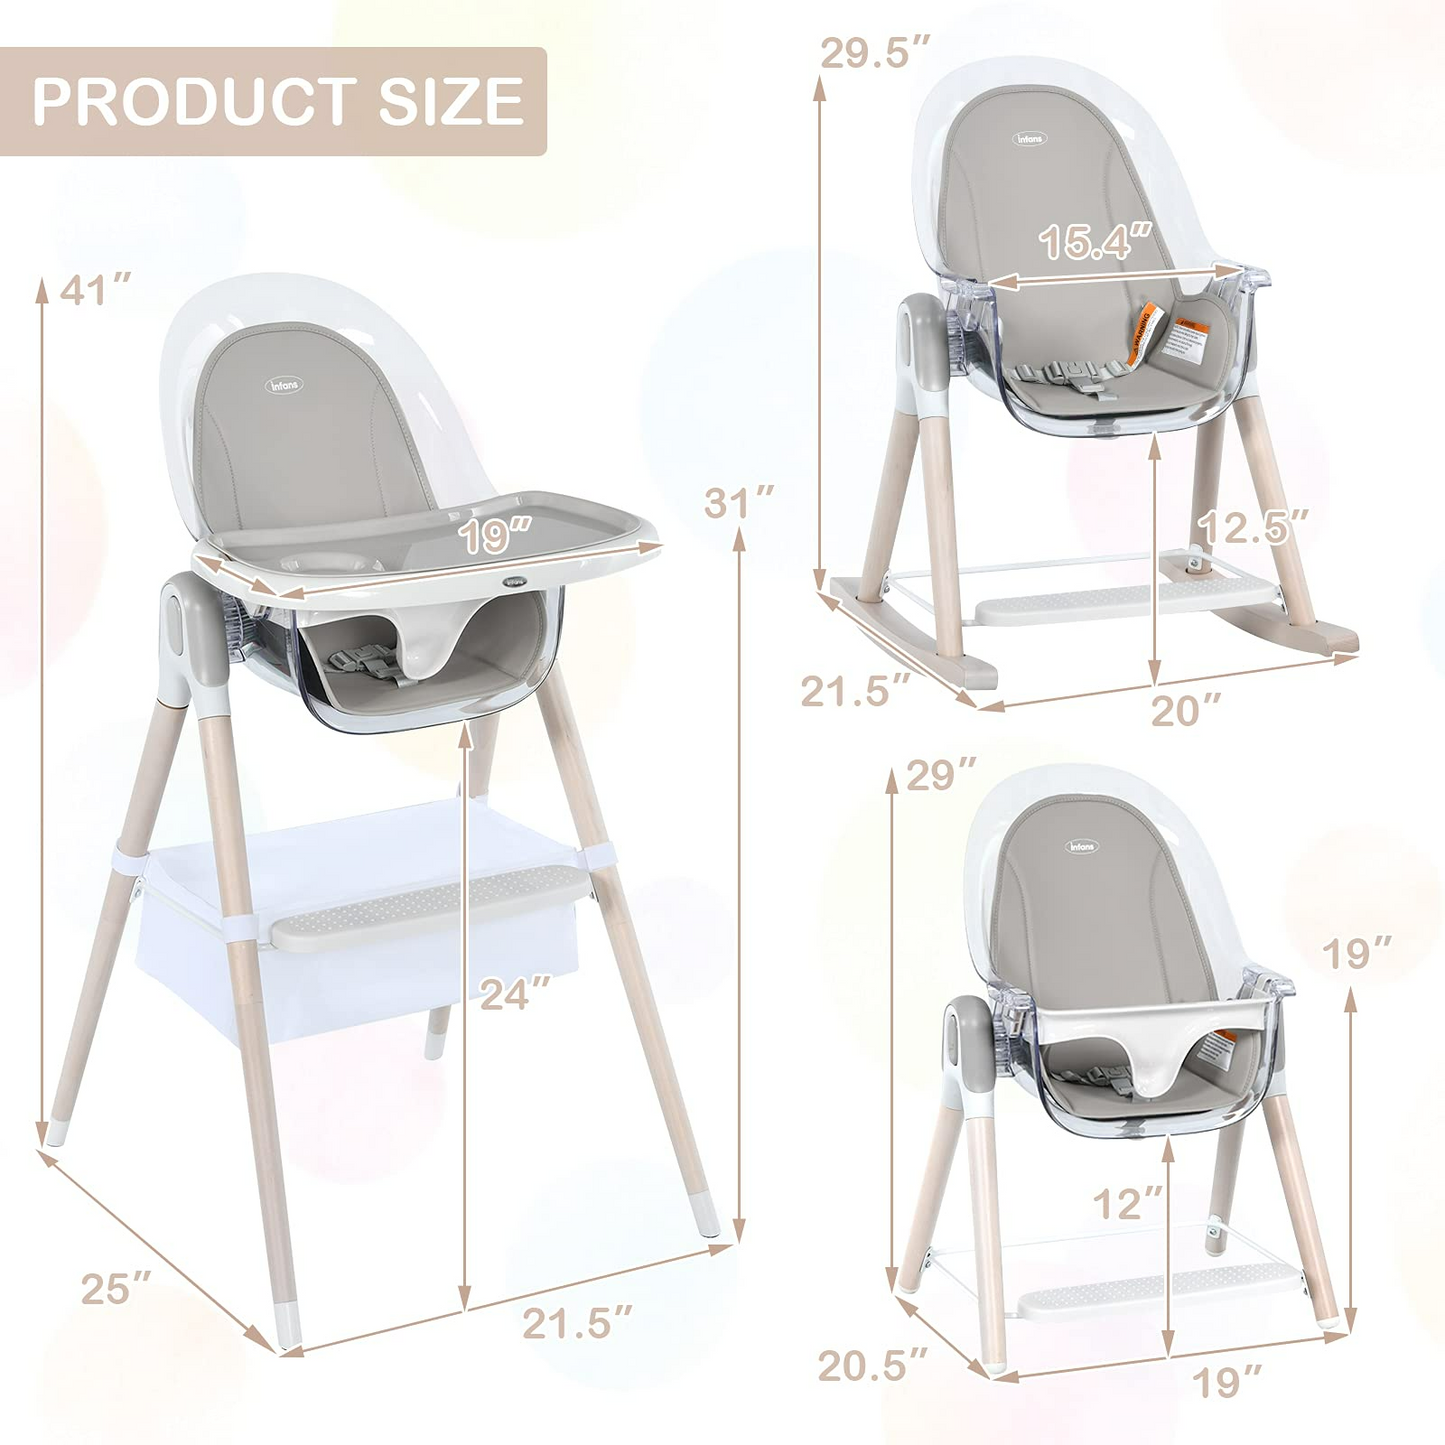 OLAKIDS 4 in 1 Wooden Baby High Chair, Rocking Chair/Booster Seat/Toddler Chair Infant Dining Chairs w/ Double Removable Tray OLAKIDS